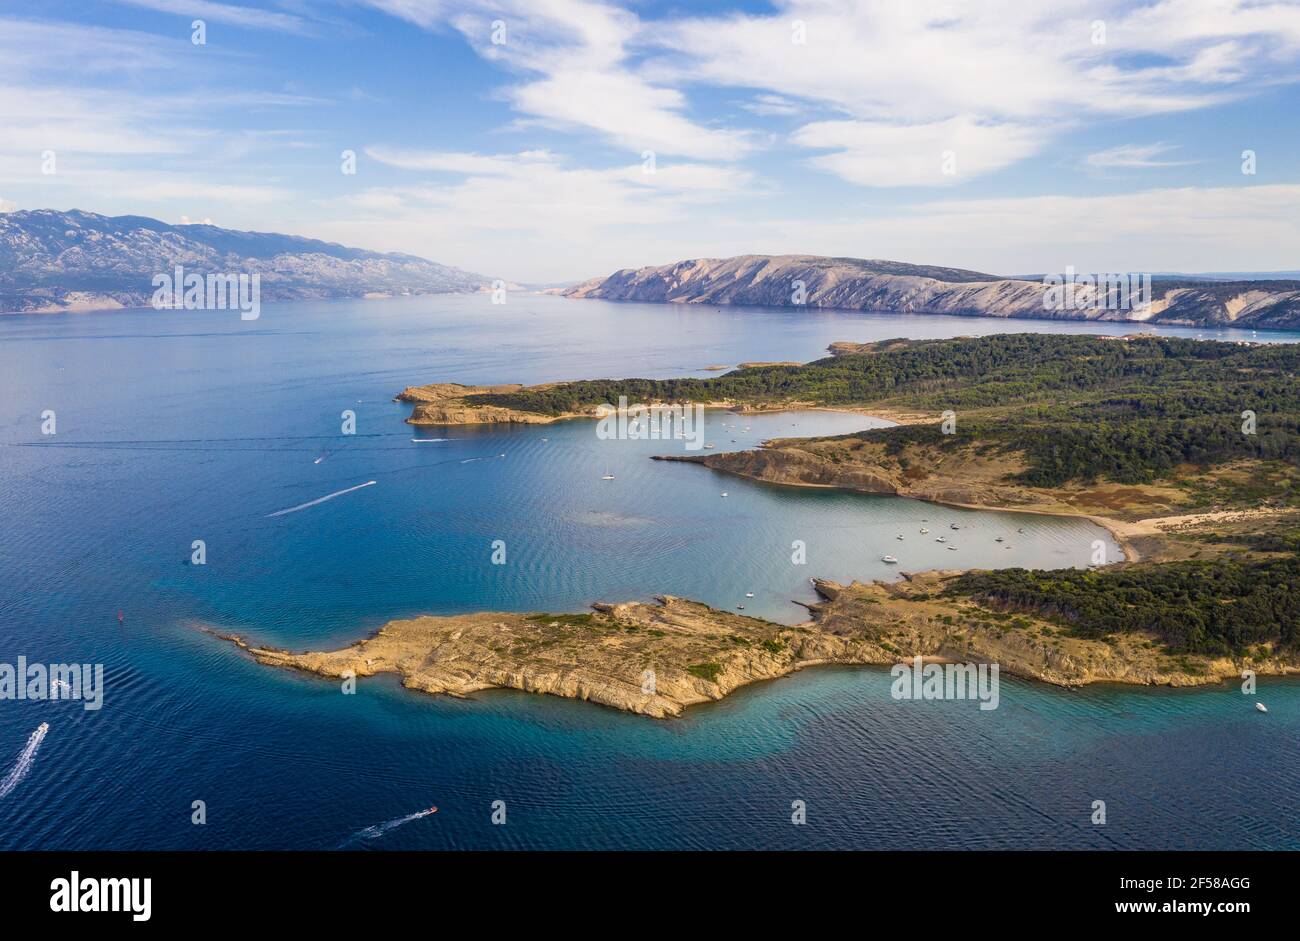 Aerial vire of stunning coast with sandy beach in the Lopar area of the Rab island by the Adriatic sea in Dalmatia, Croatia Stock Photo